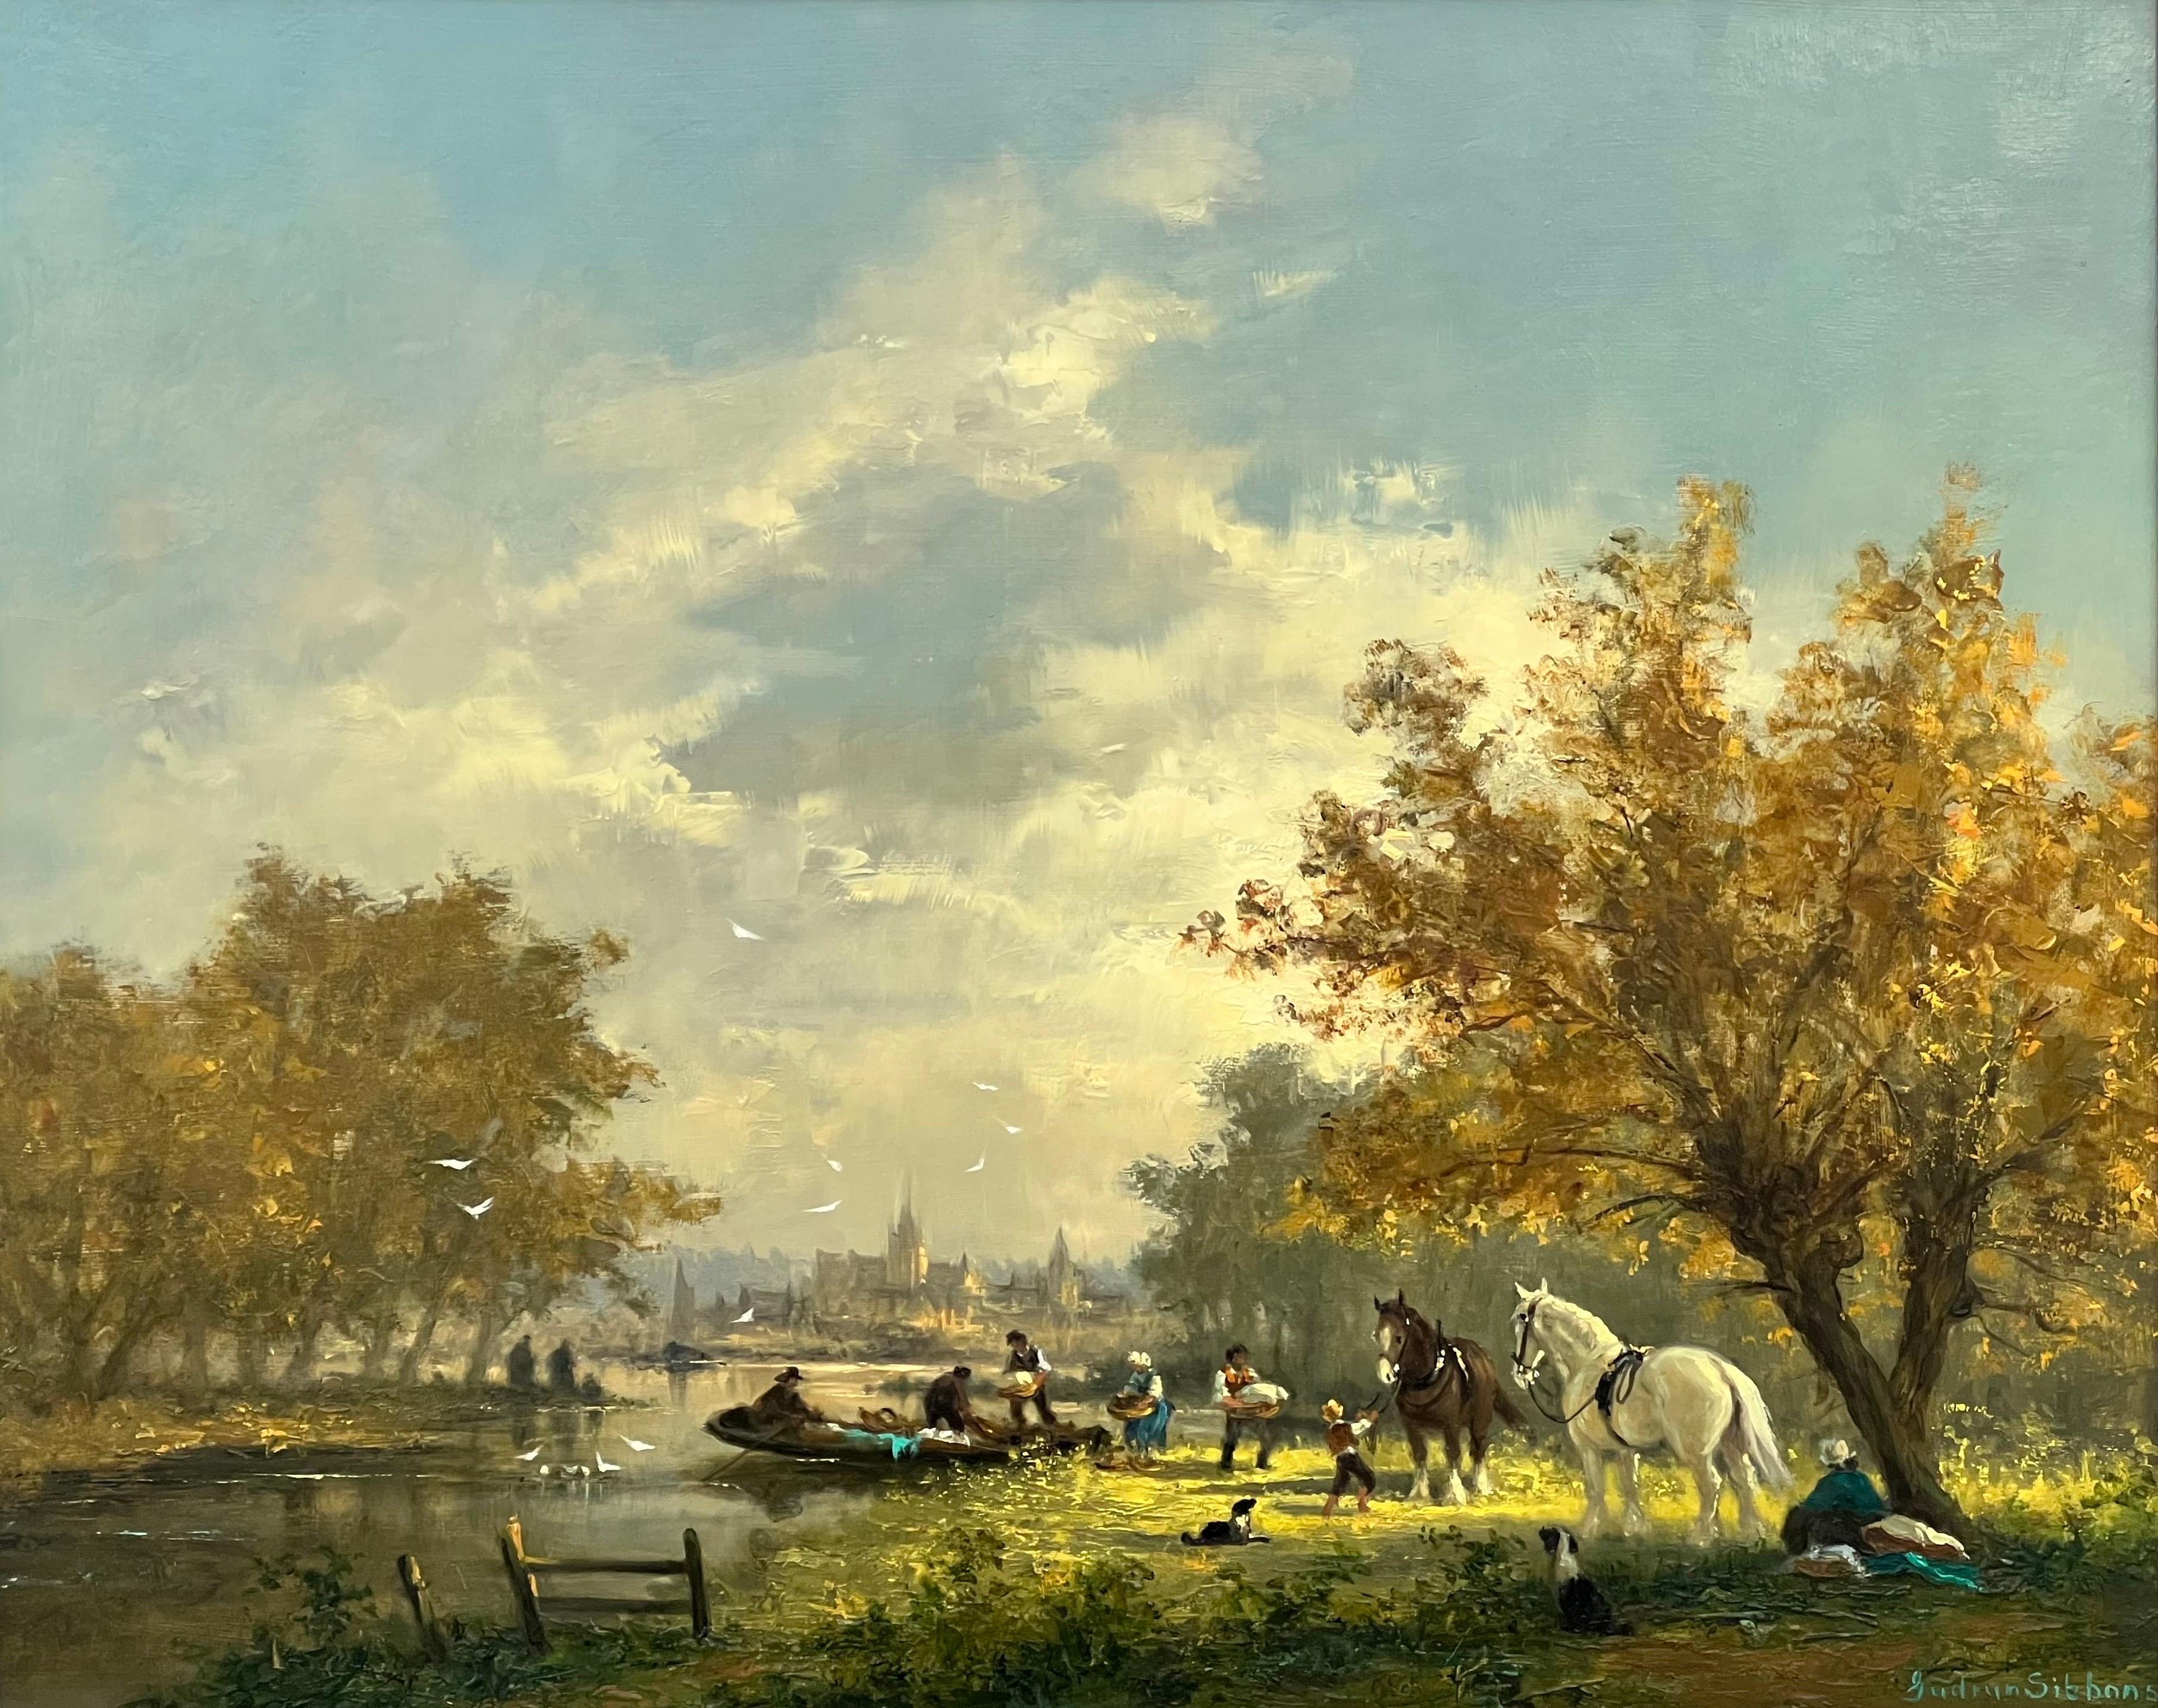 Idyllic Countryside Scene with River Boat, Horses, Figures & Dogs in Sunshine - Realist Painting by Gudrun Sibbons